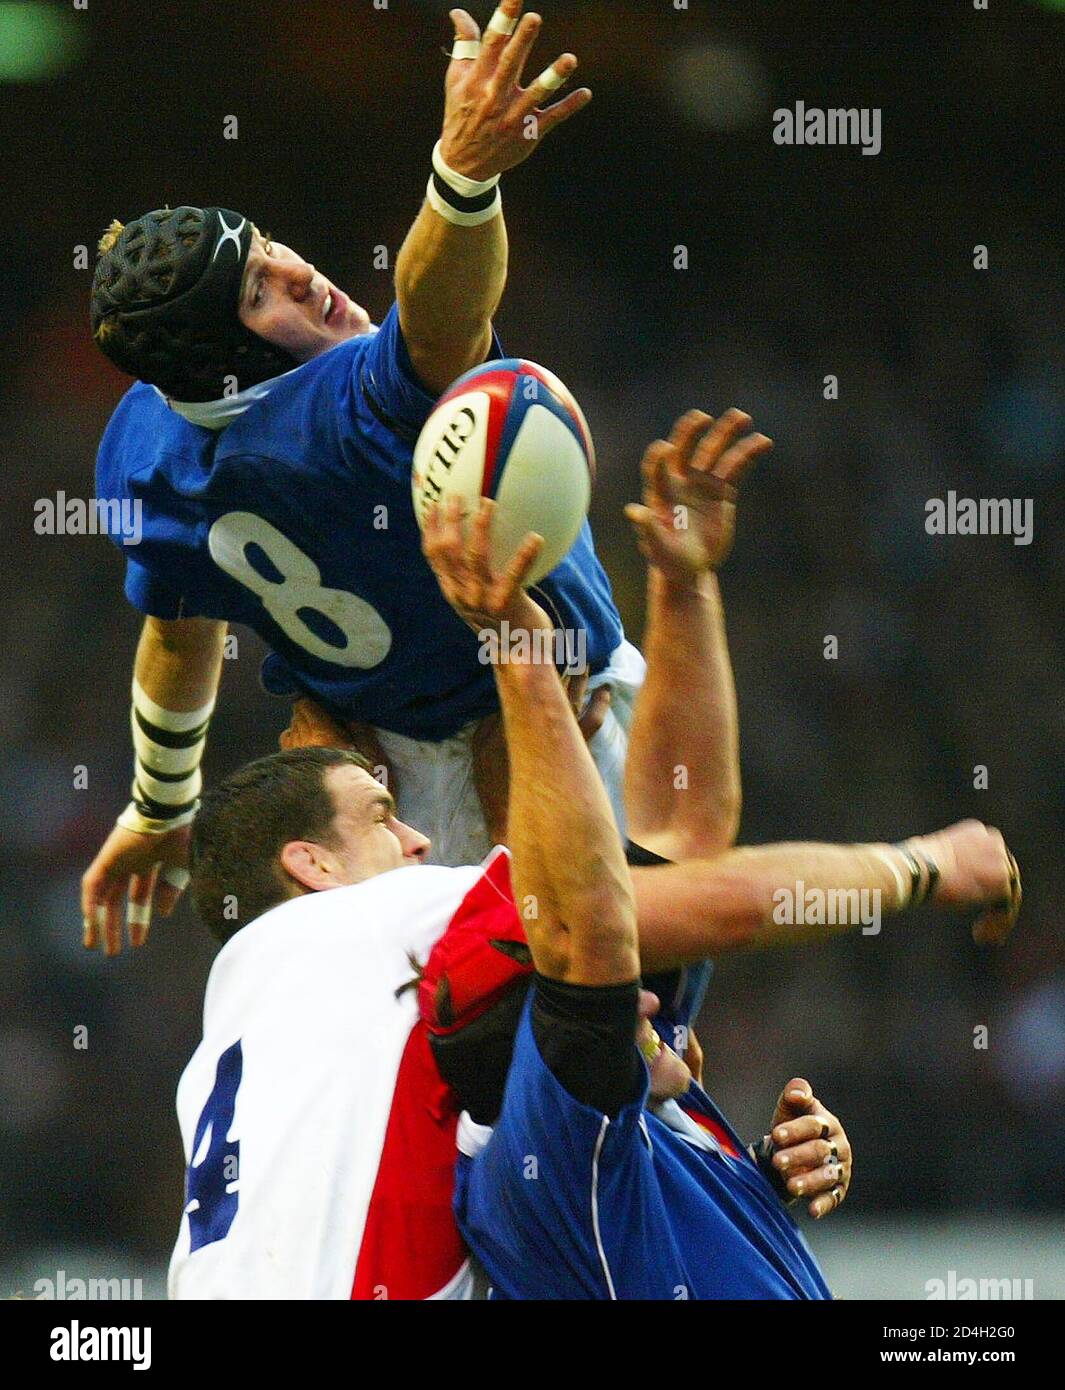 England captain Martin Johnson (C) fights for the ball against France's Imanol Harinordoquy (8) and Serge Betsen (R) during their Six Nations rugby union match at Twickenham in London, February 15, 2003. REUTERS/Russell Boyce Pictures of the month February 2003  RUS/ASA Stock Photo